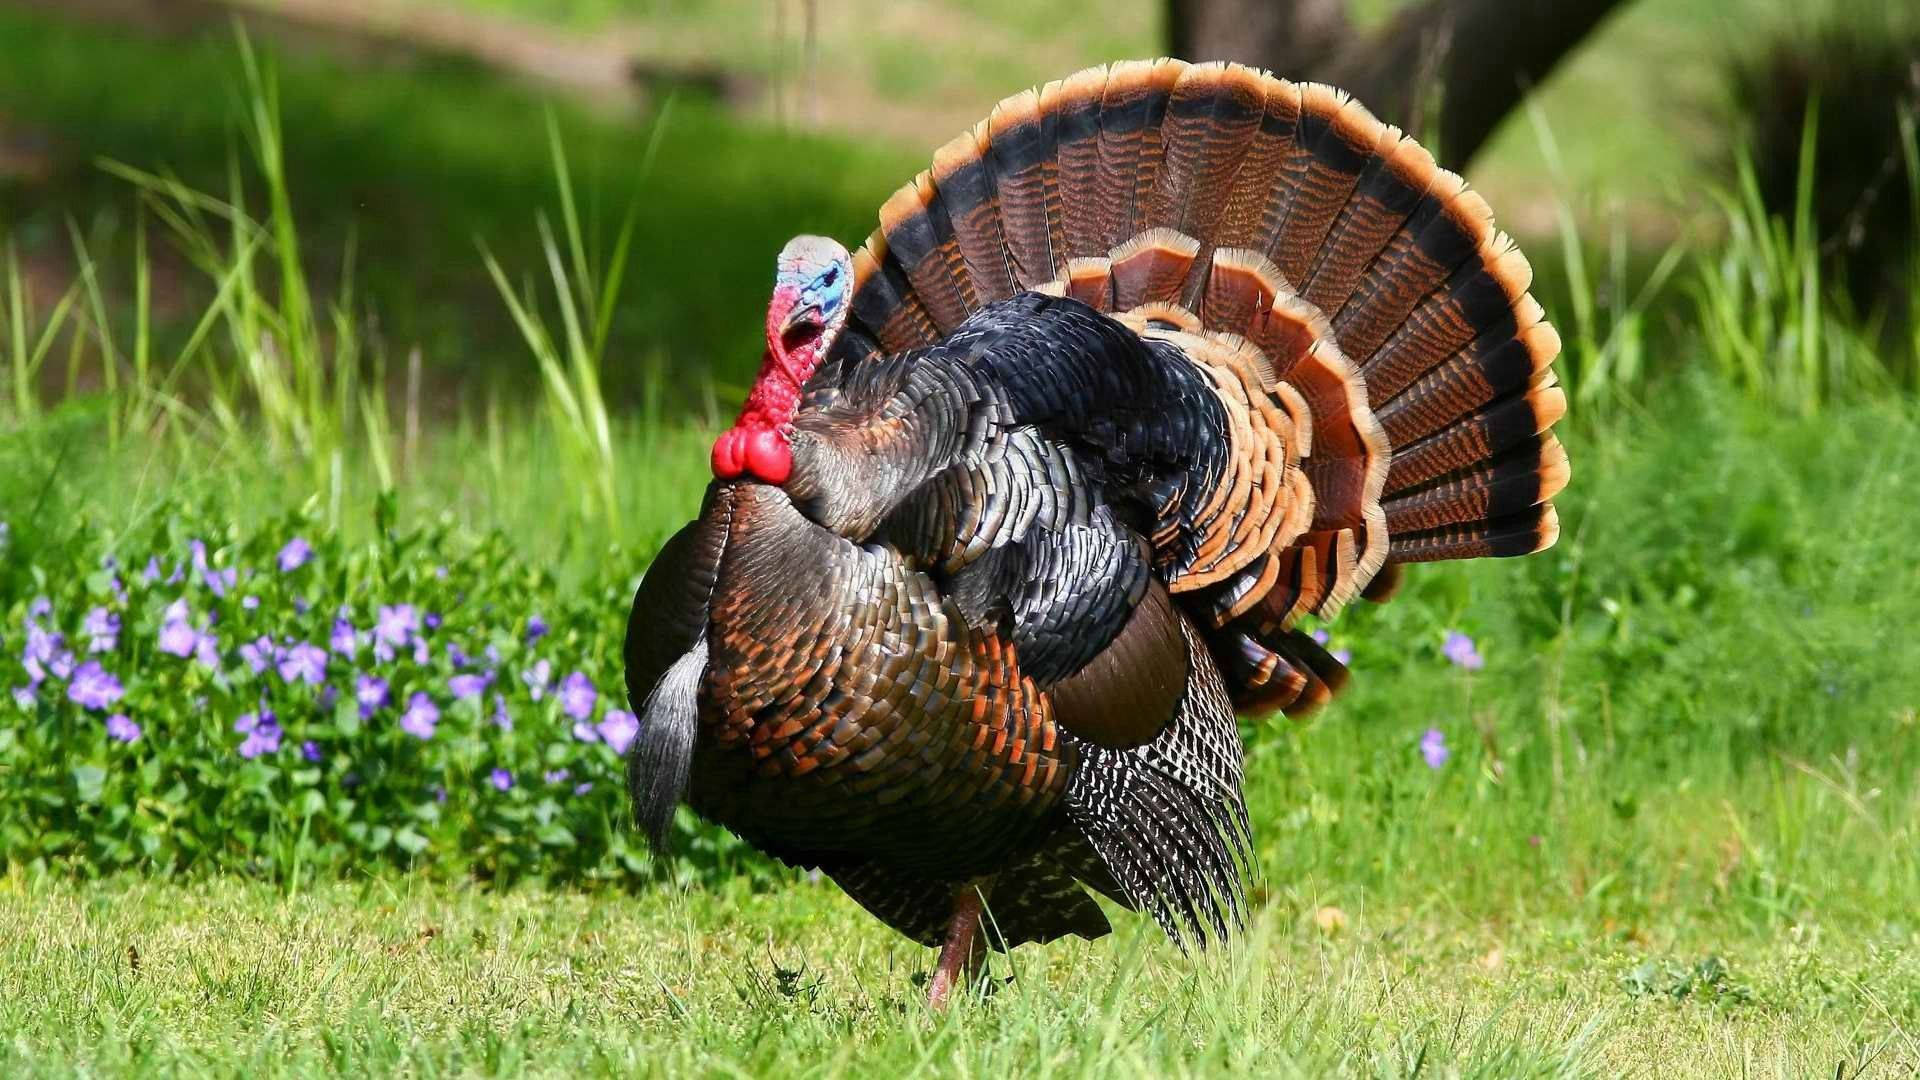 A Turkey Is Walking In The Grass Near Some Flowers Background